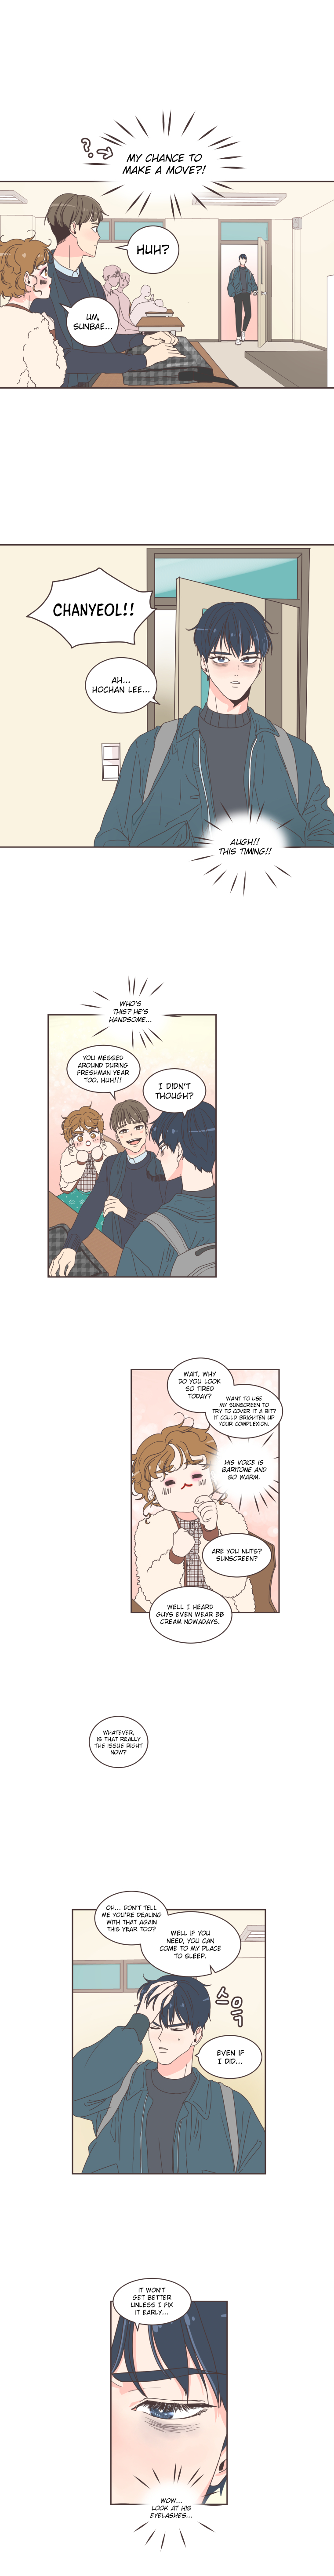 She's My Type - Chapter 2 Page 10